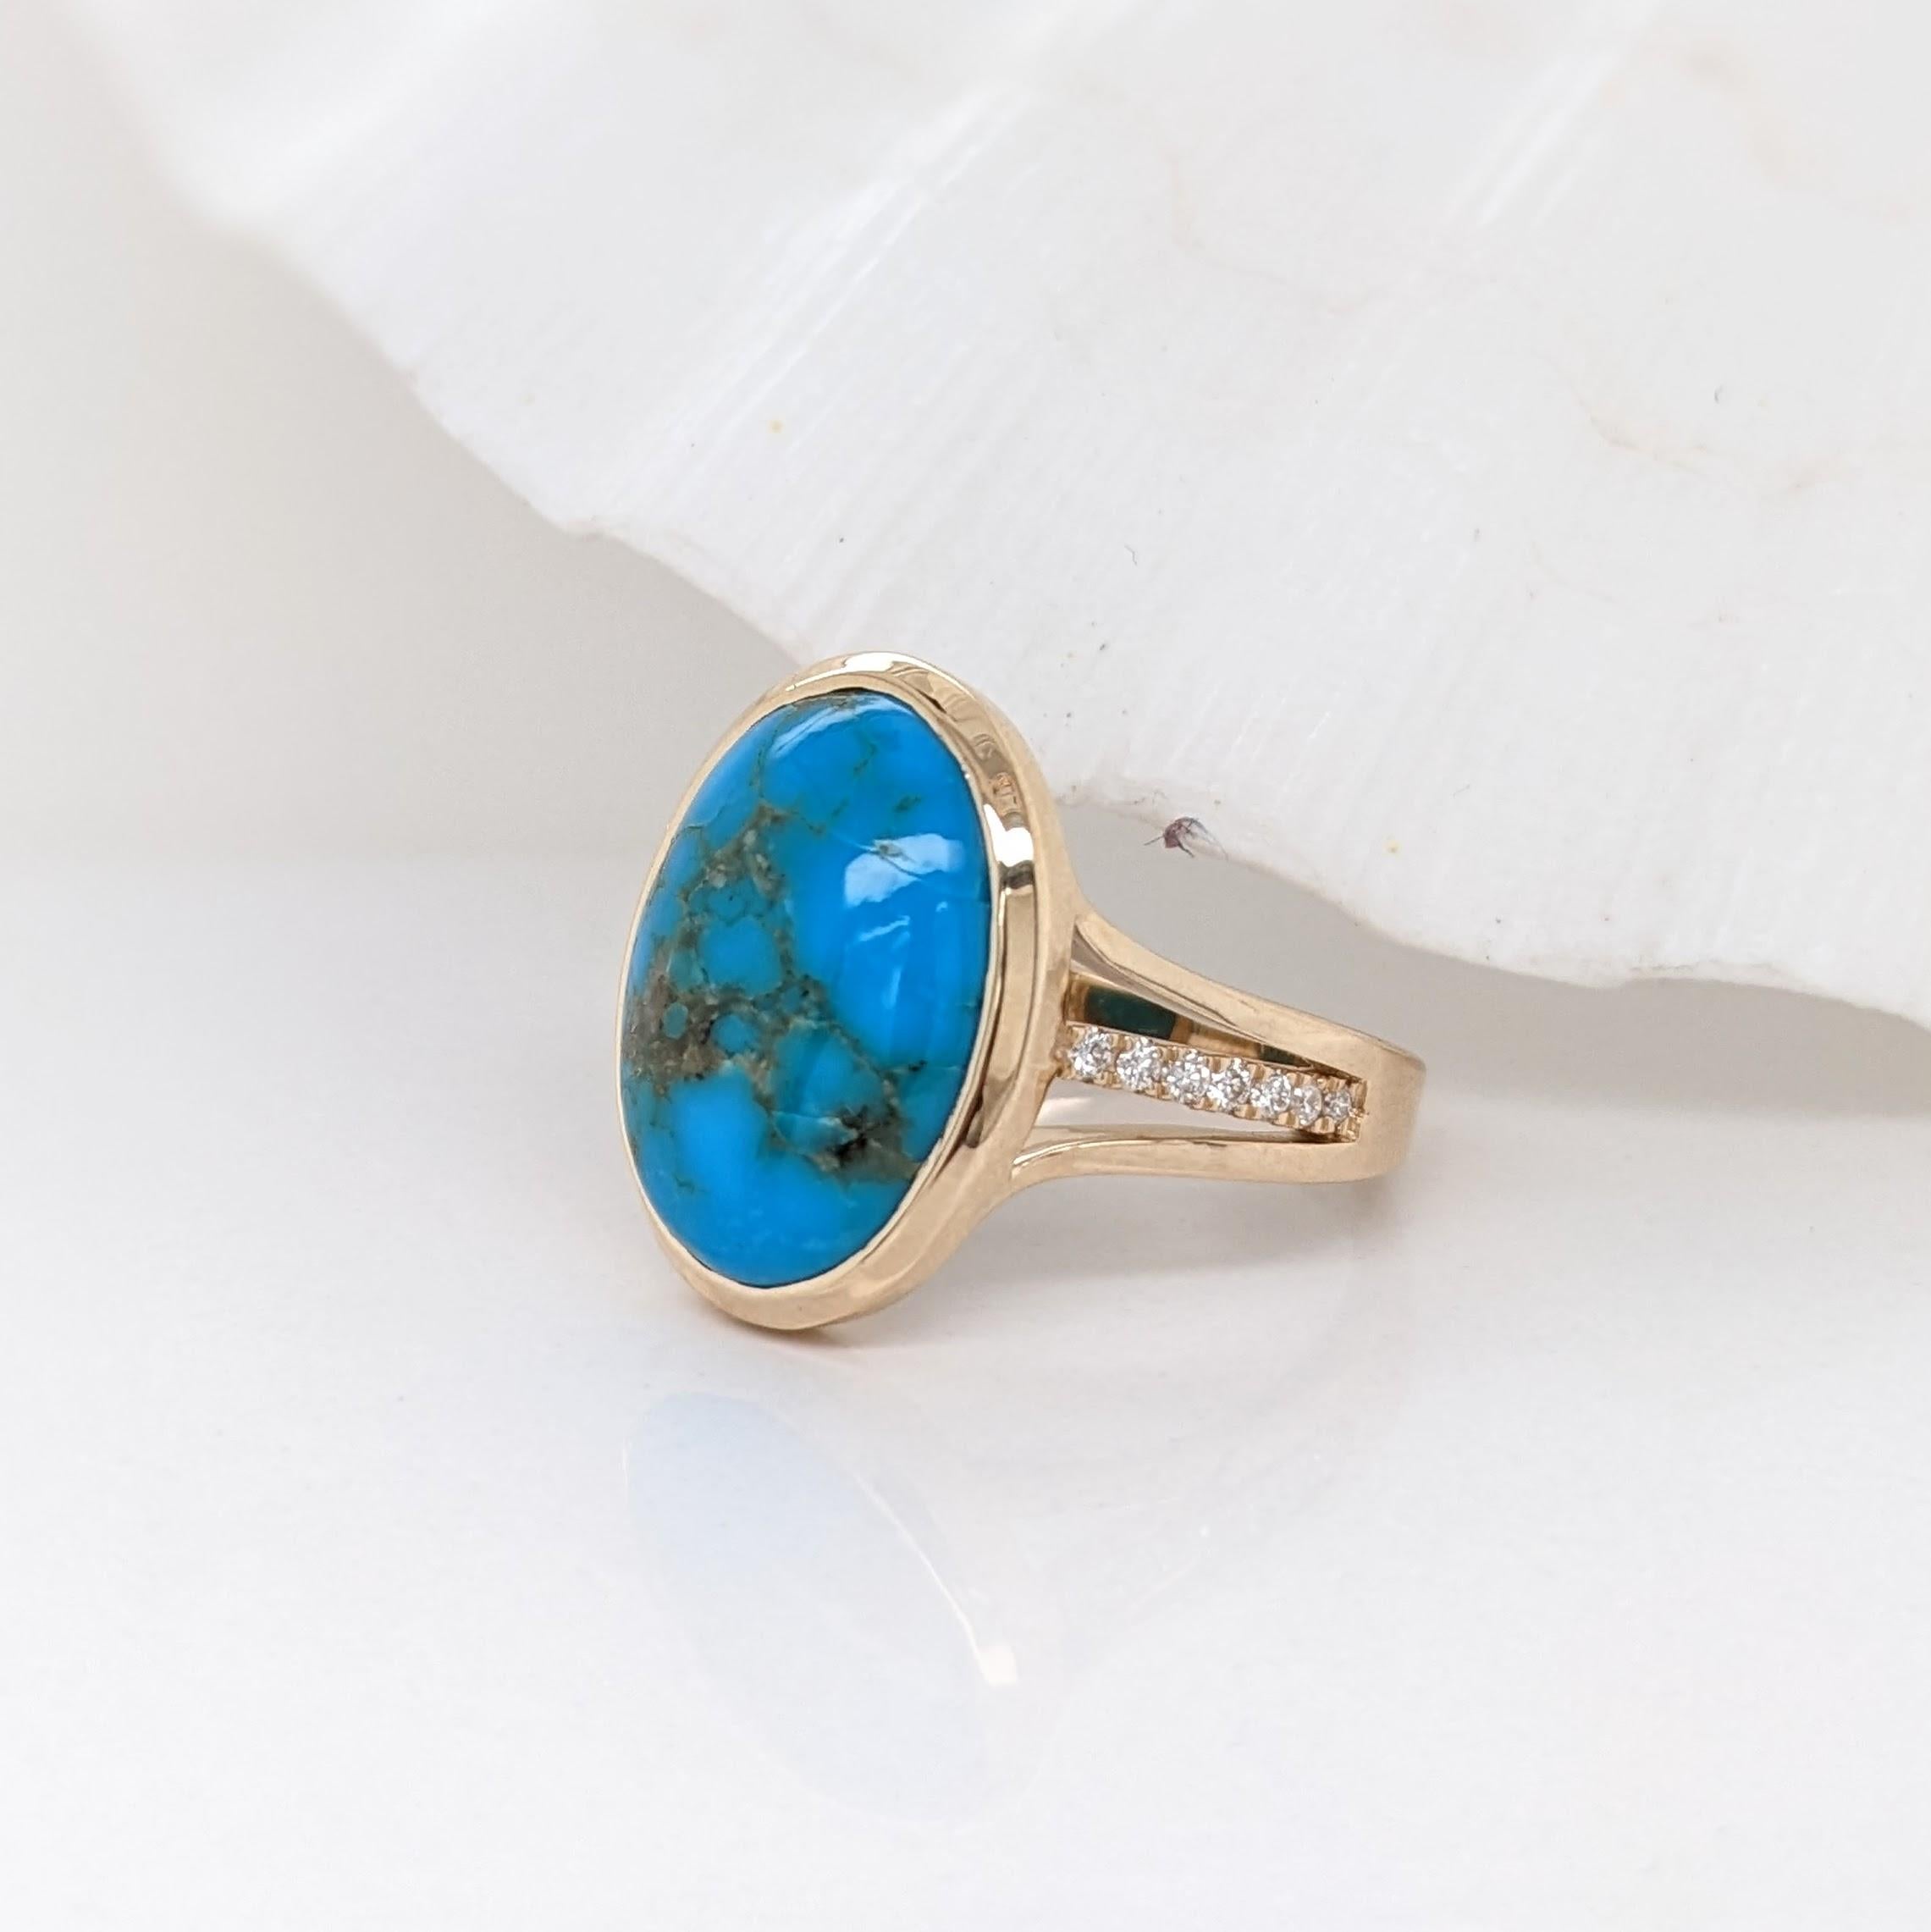 Art Deco 6.31ct Sonoran Turquoise w Diamond Accents in 14k Solid Yellow Gold Oval 16x12mm